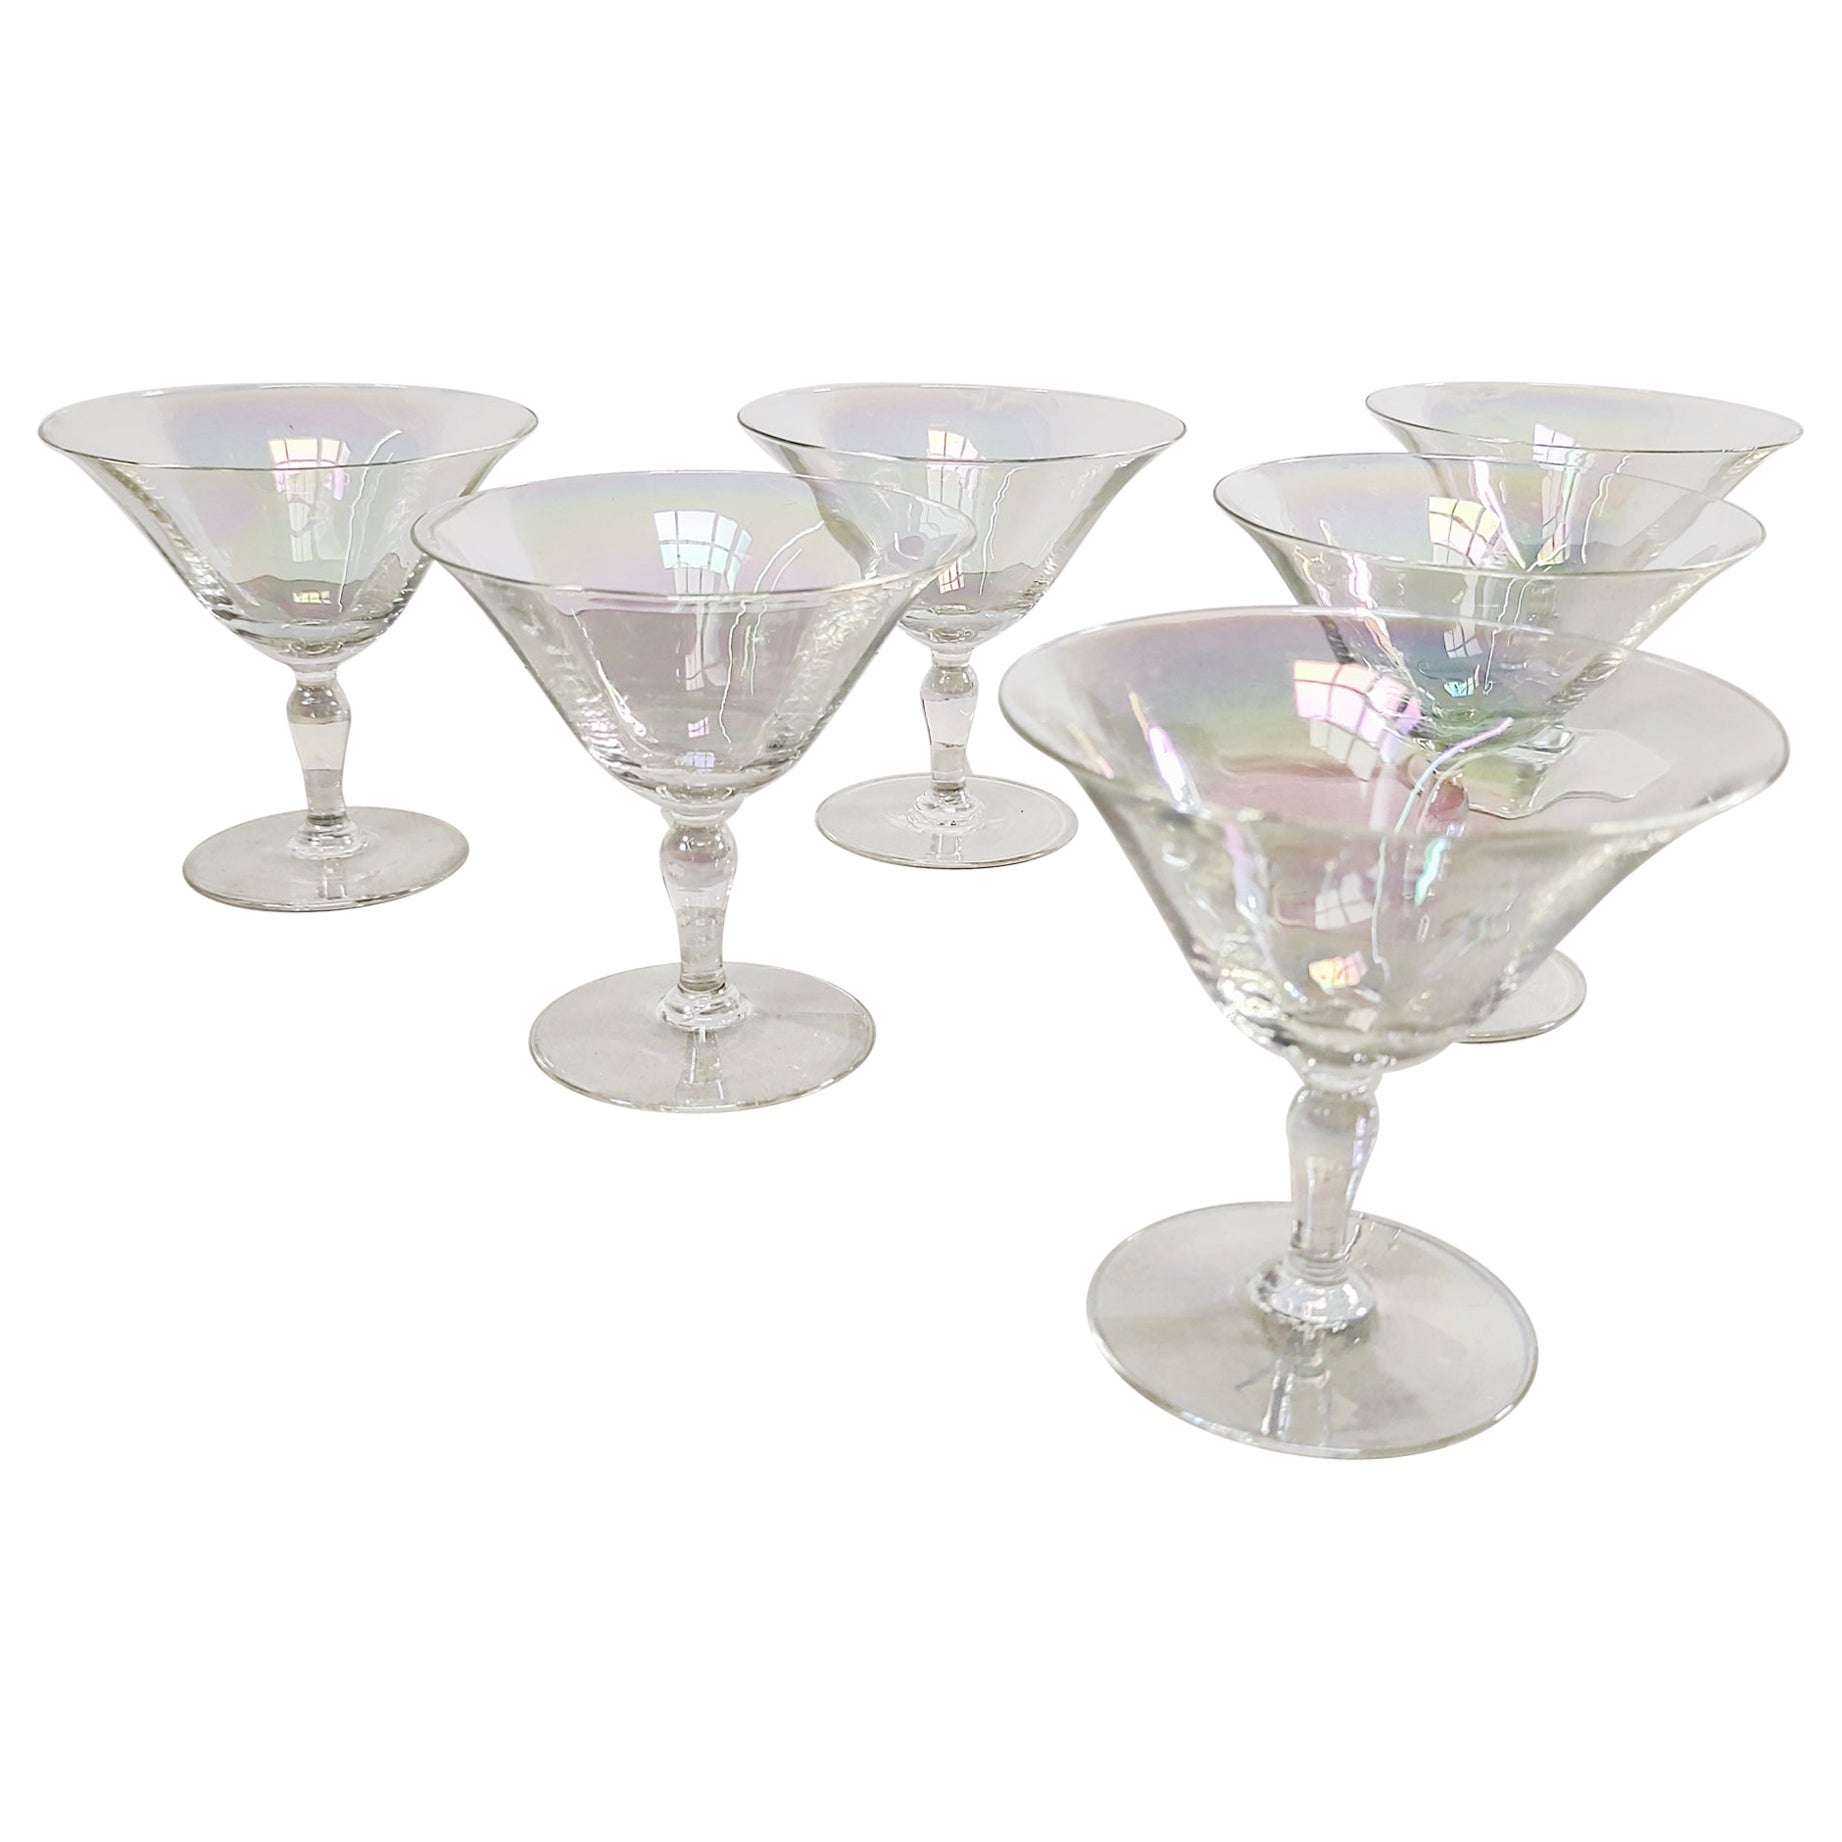 Set of 6 Vintage Hand Blown Iridescent Luster Tulip Coupe Glasses 1930s